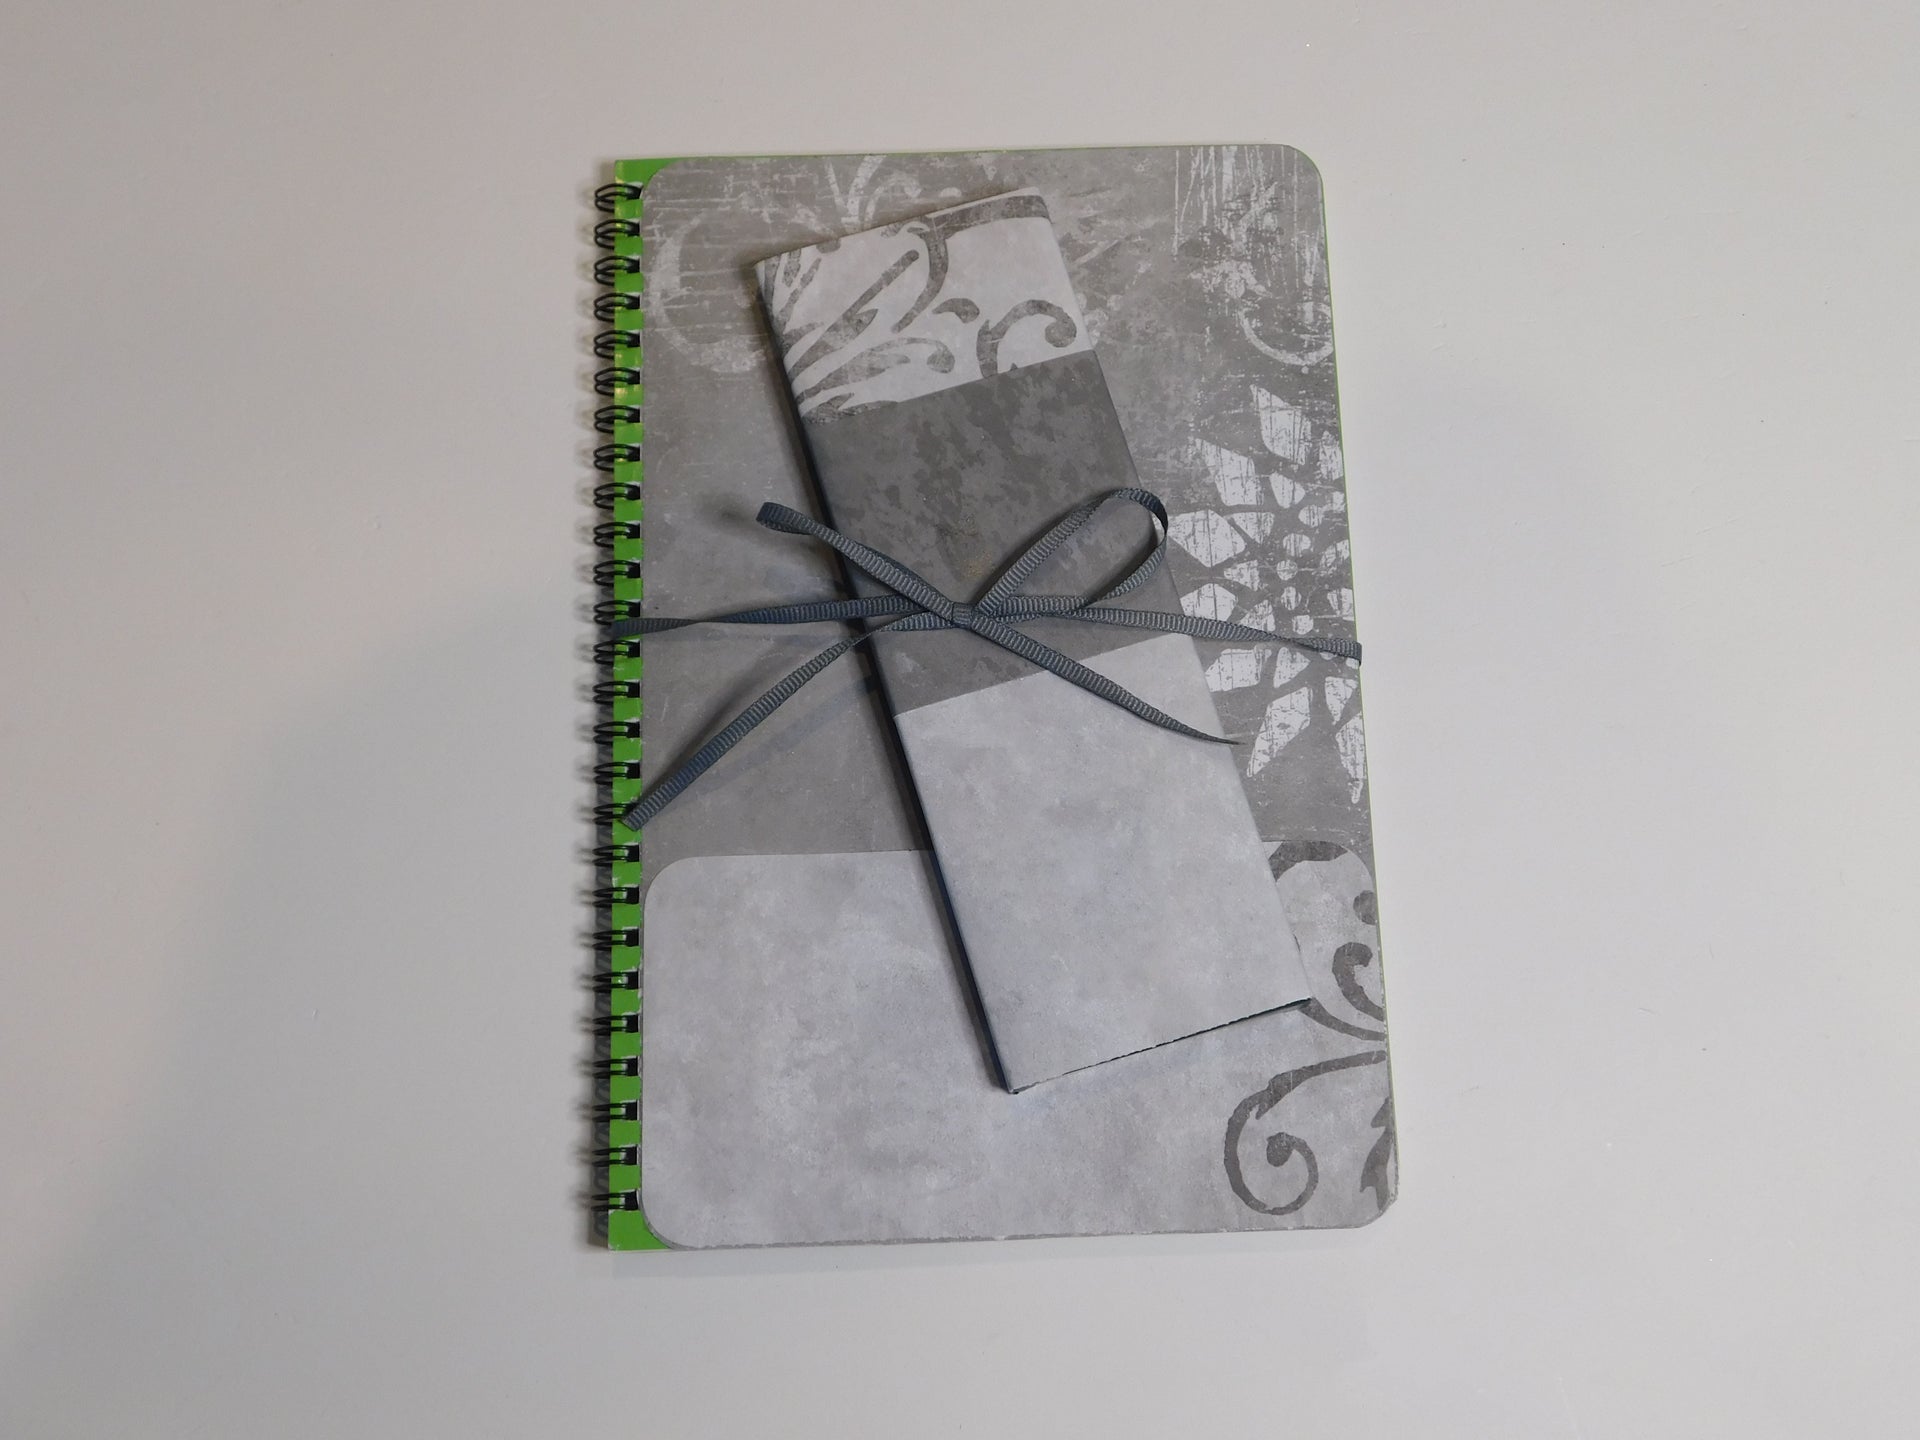 Sketchbook for Drawing and Mixed Media - Mom – Sutter Lane